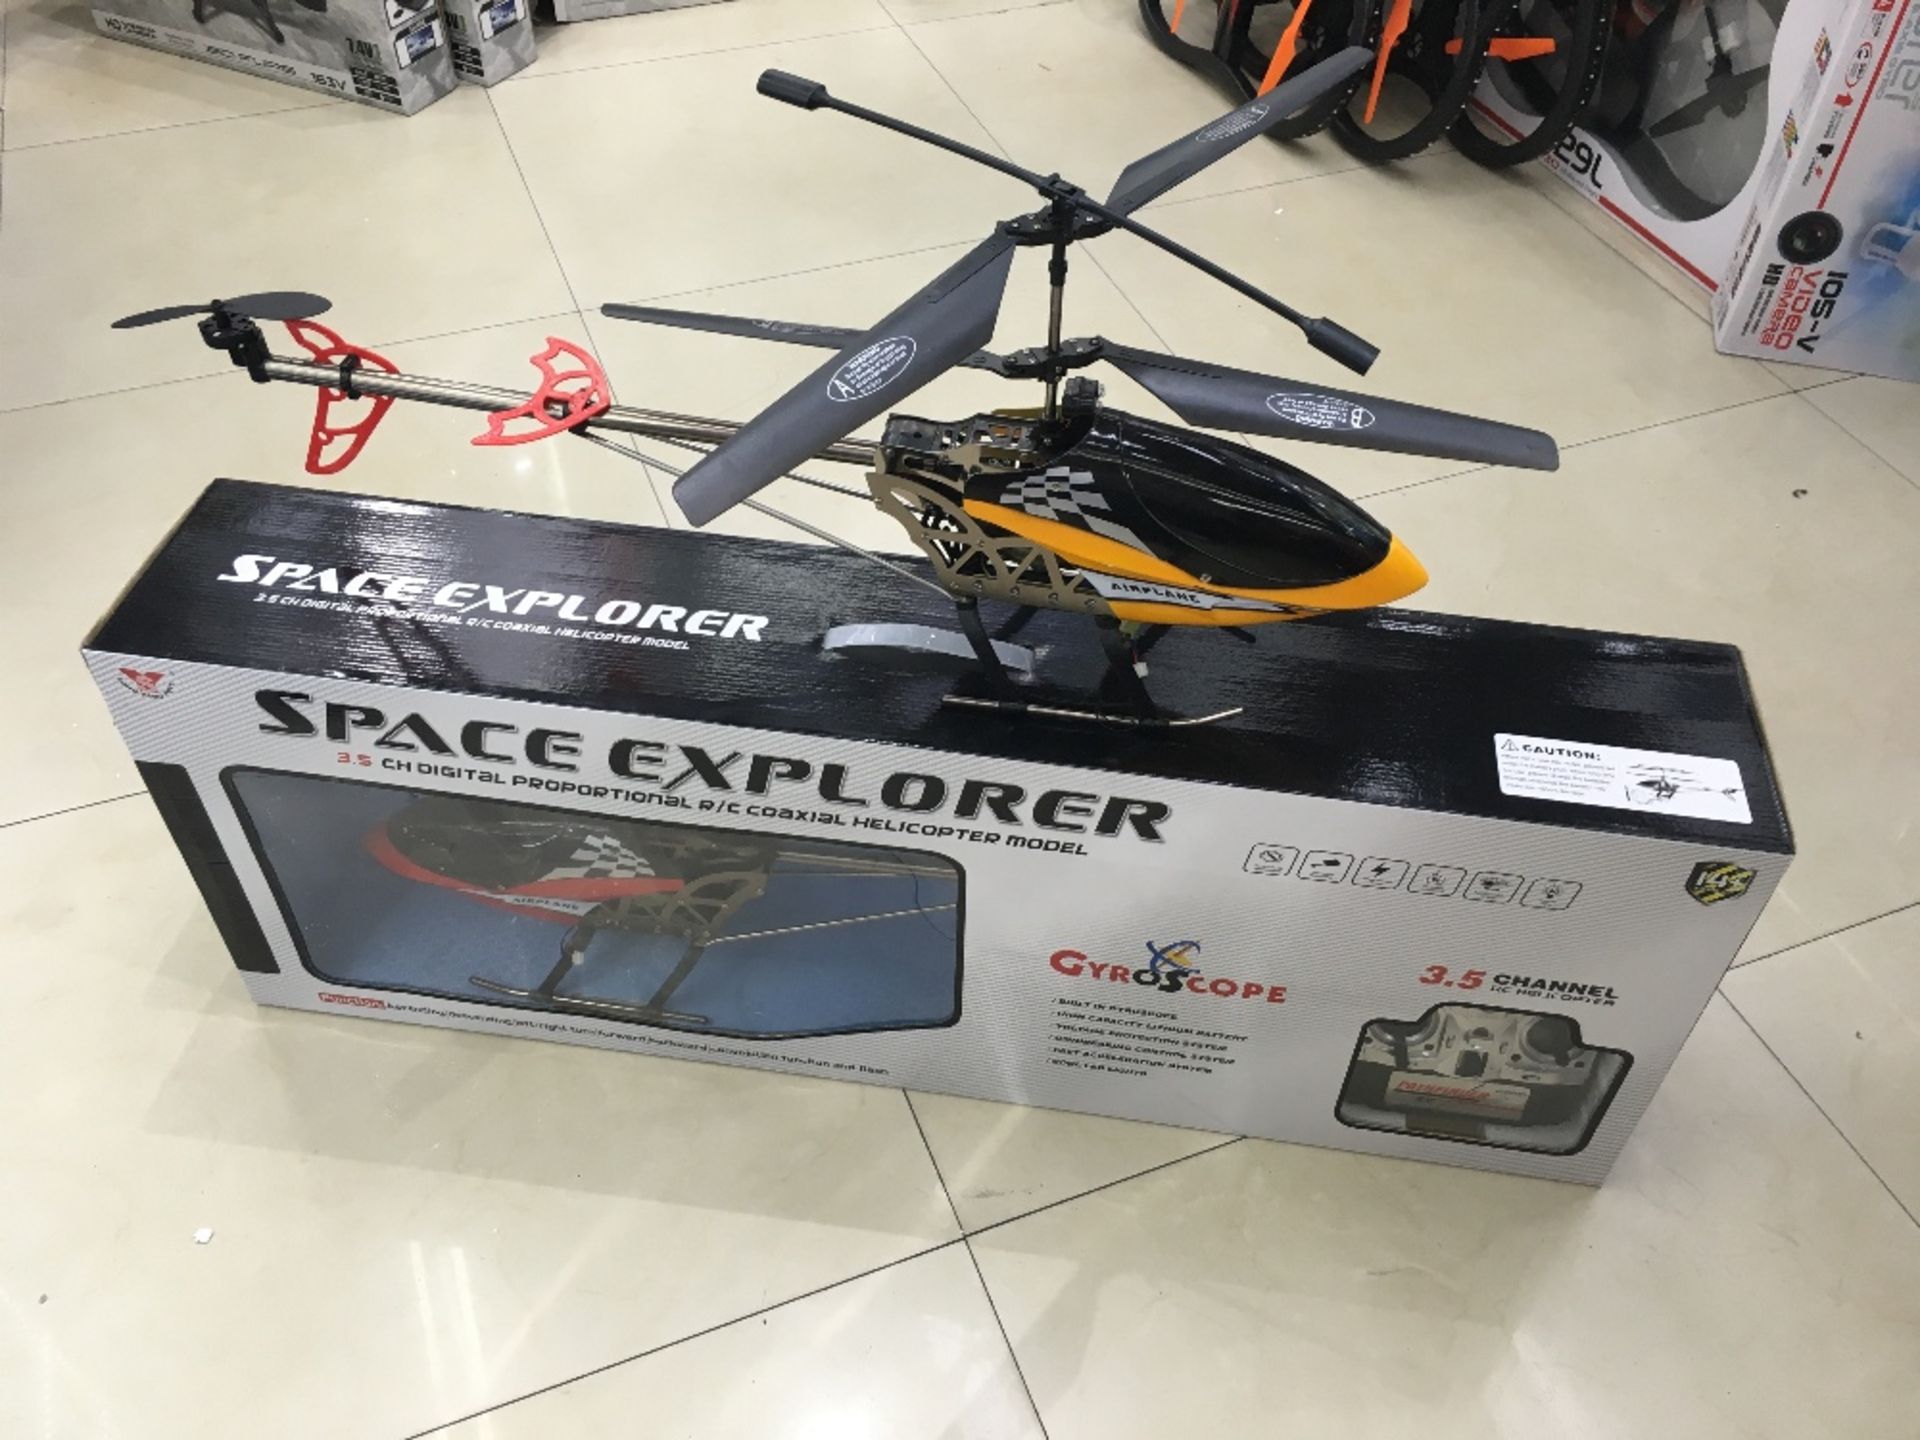 BRAND NEW BOXED R/C MASSIVE 3.5CH DIGITAL COXIAL POWERFUL HELICOPTER